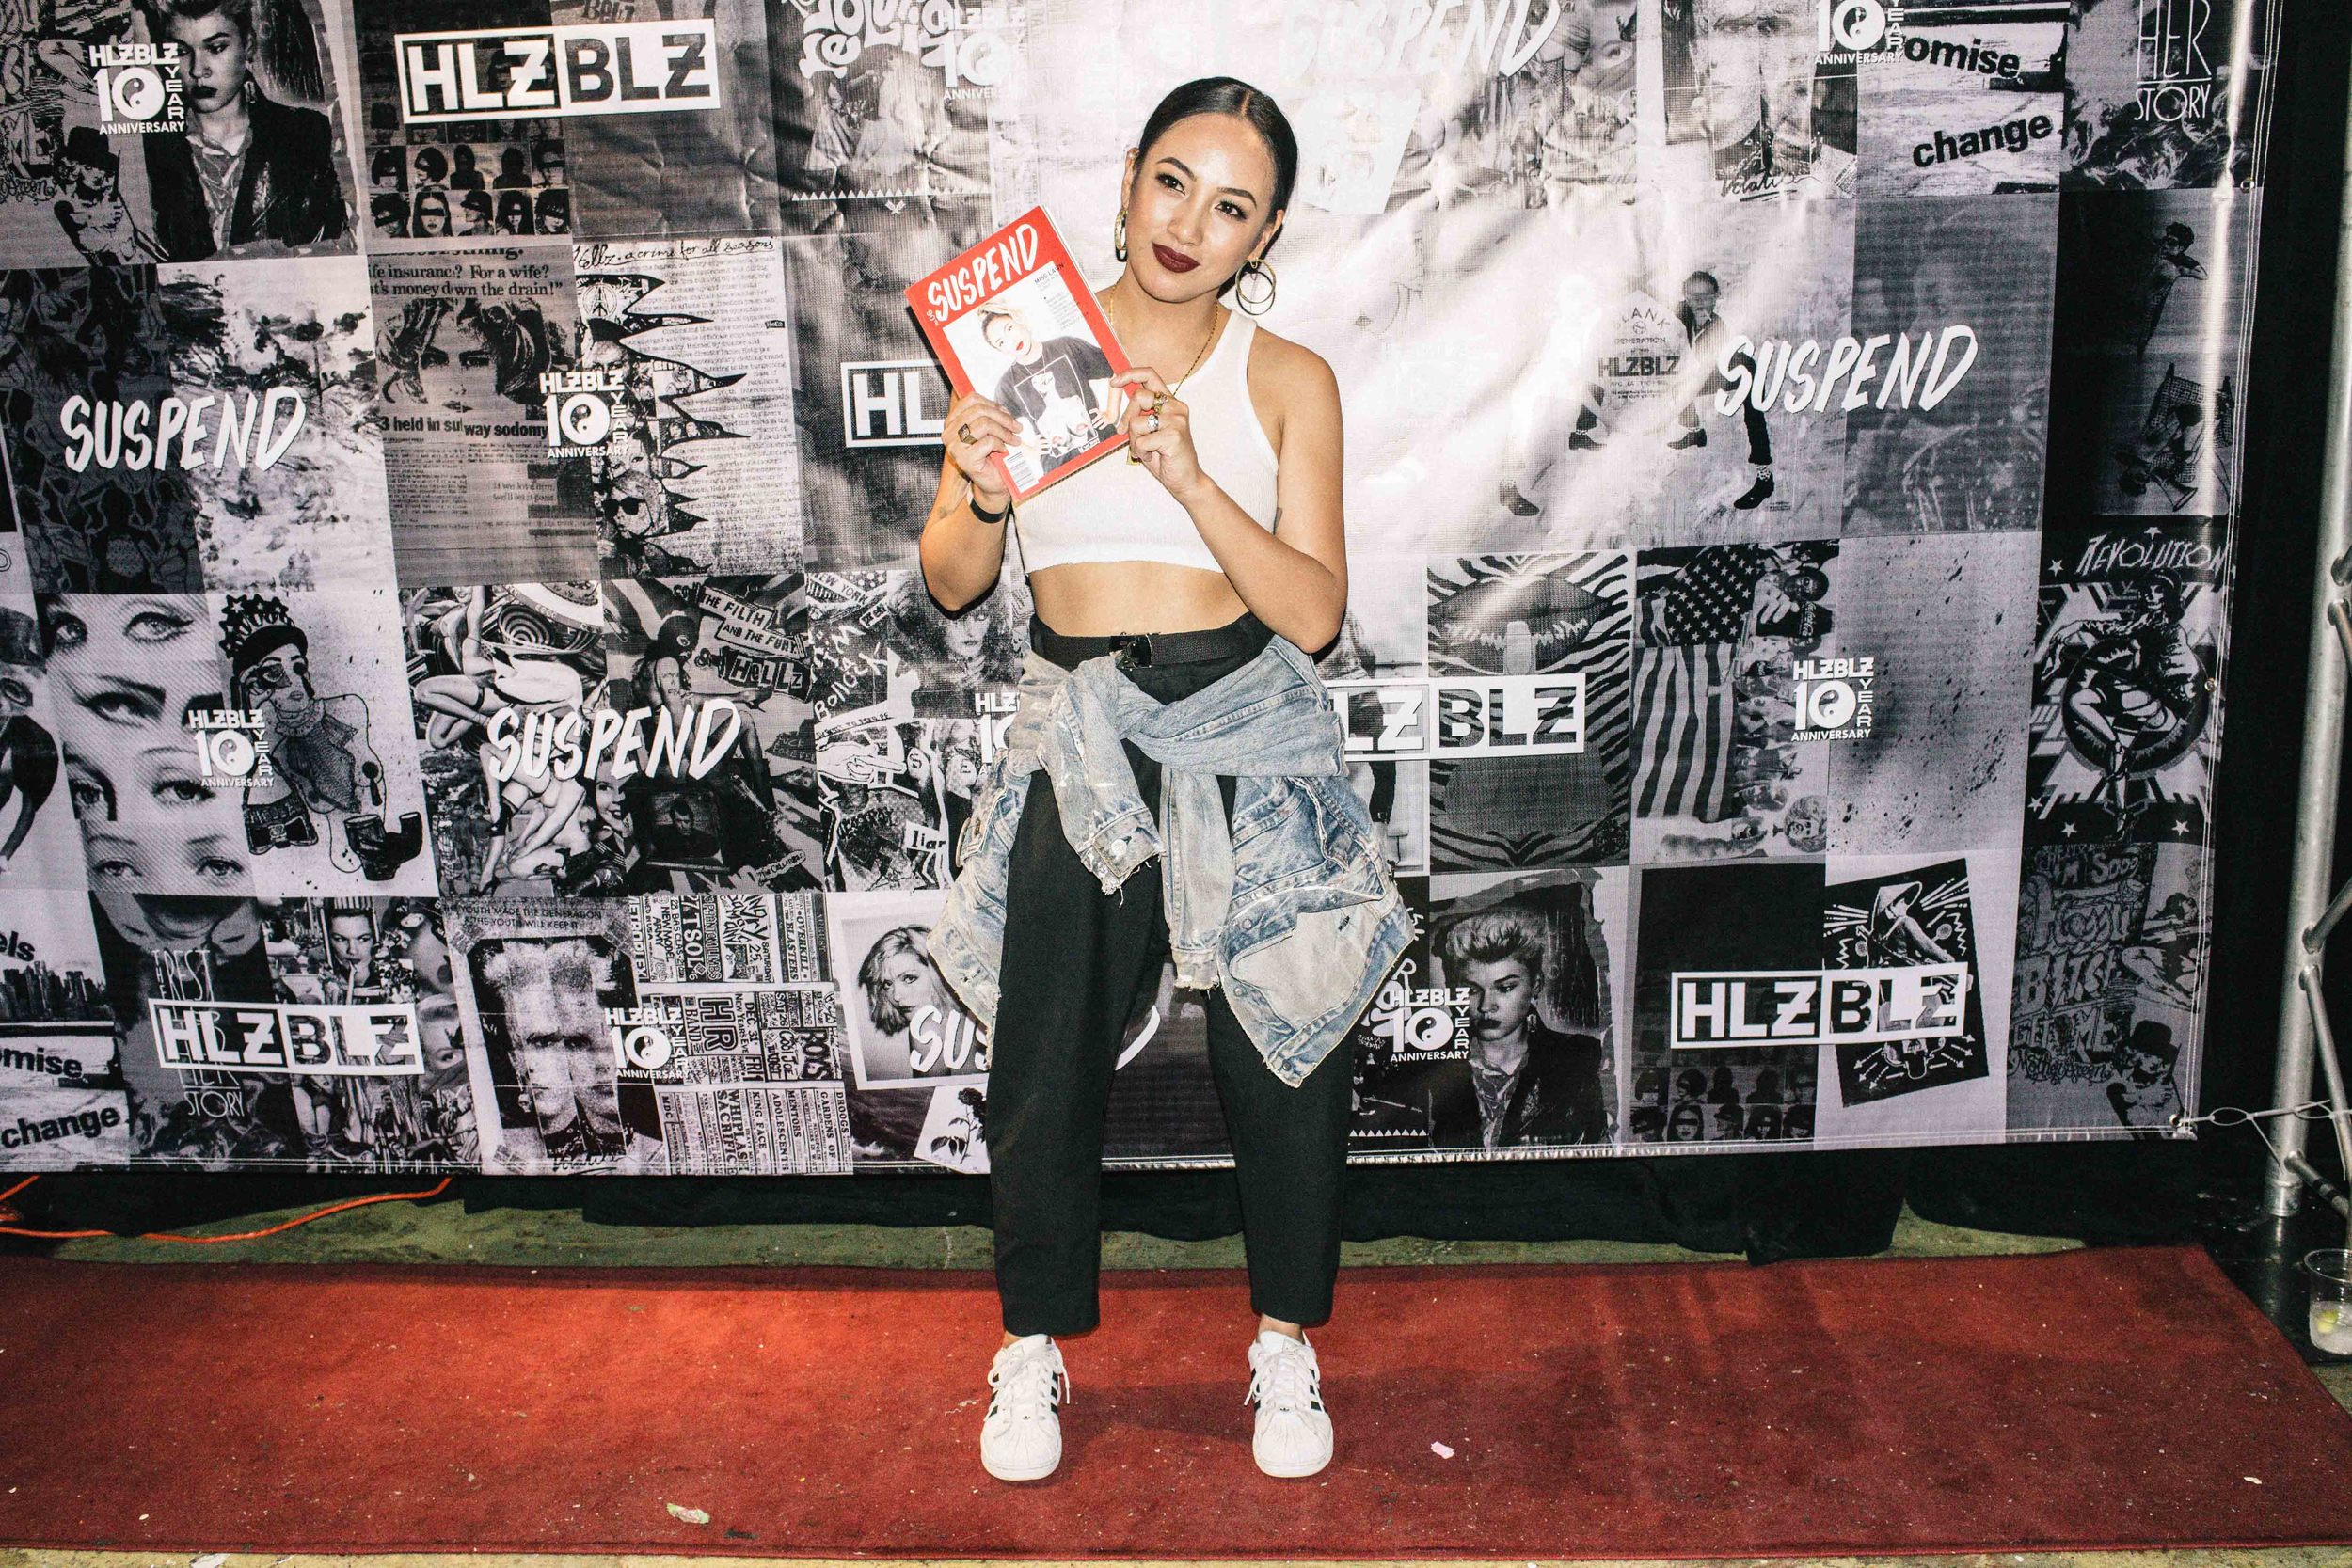  Miss Lawn holding her magazine cover at the ISSUE 06 Release Party x 10YR HLZBLZ Anniversary (Feb 11) at Globe Theater. / Photo: © Jonathan Tate for SUSPEND Magazine. 